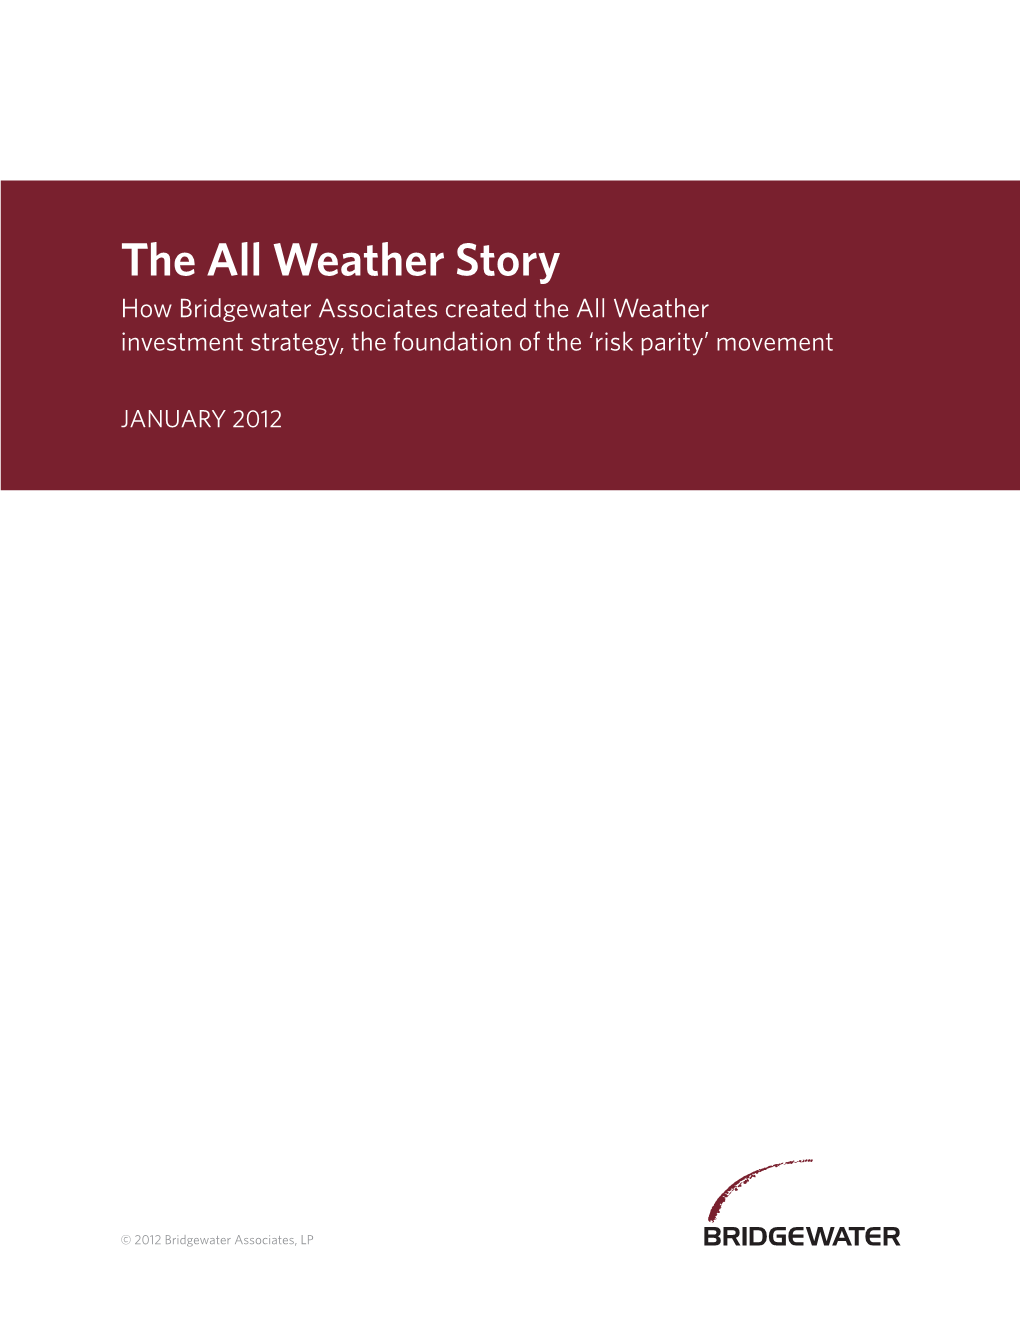 The All Weather Story How Bridgewater Associates Created the All Weather Investment Strategy, the Foundation of the ‘Risk Parity’ Movement